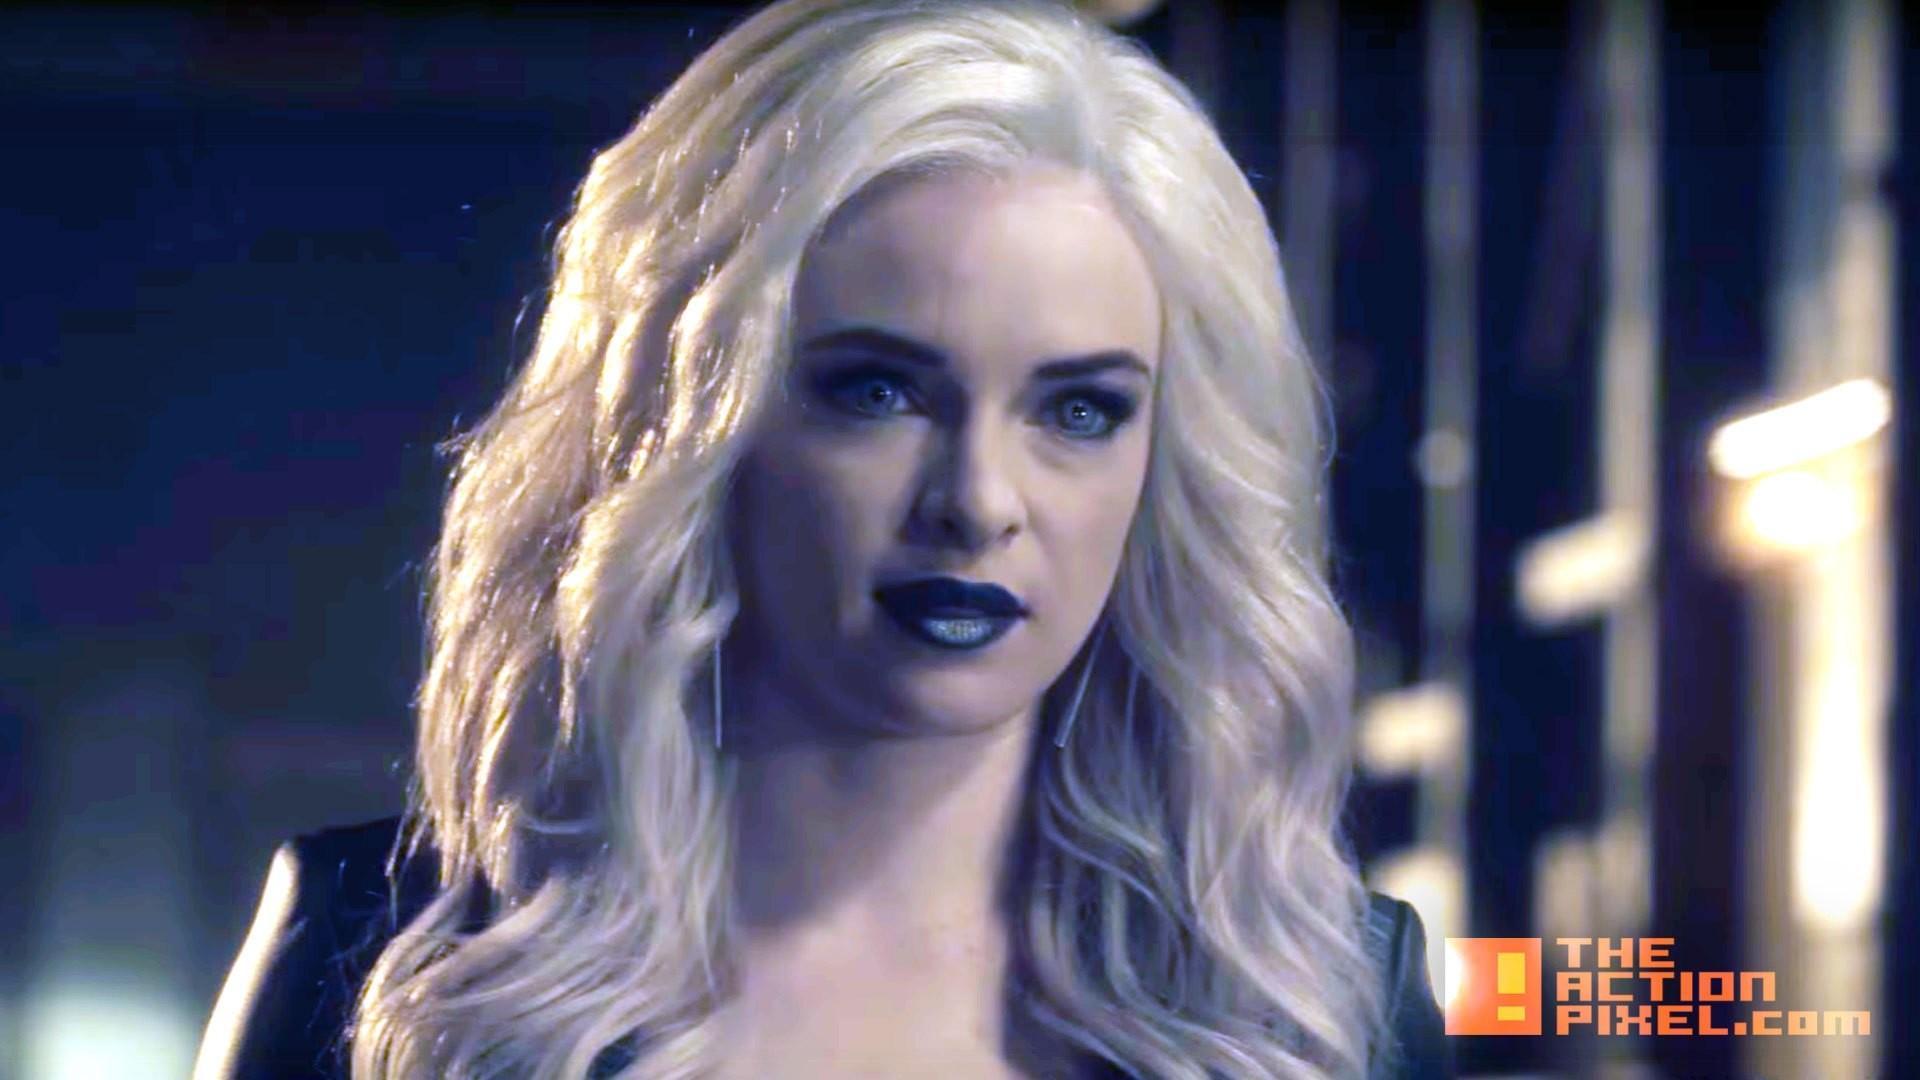 1920x1080 The CW shows off its pretty messed up trailer for the mid-season return of  The Flash, giving us a look of Killer Frost.